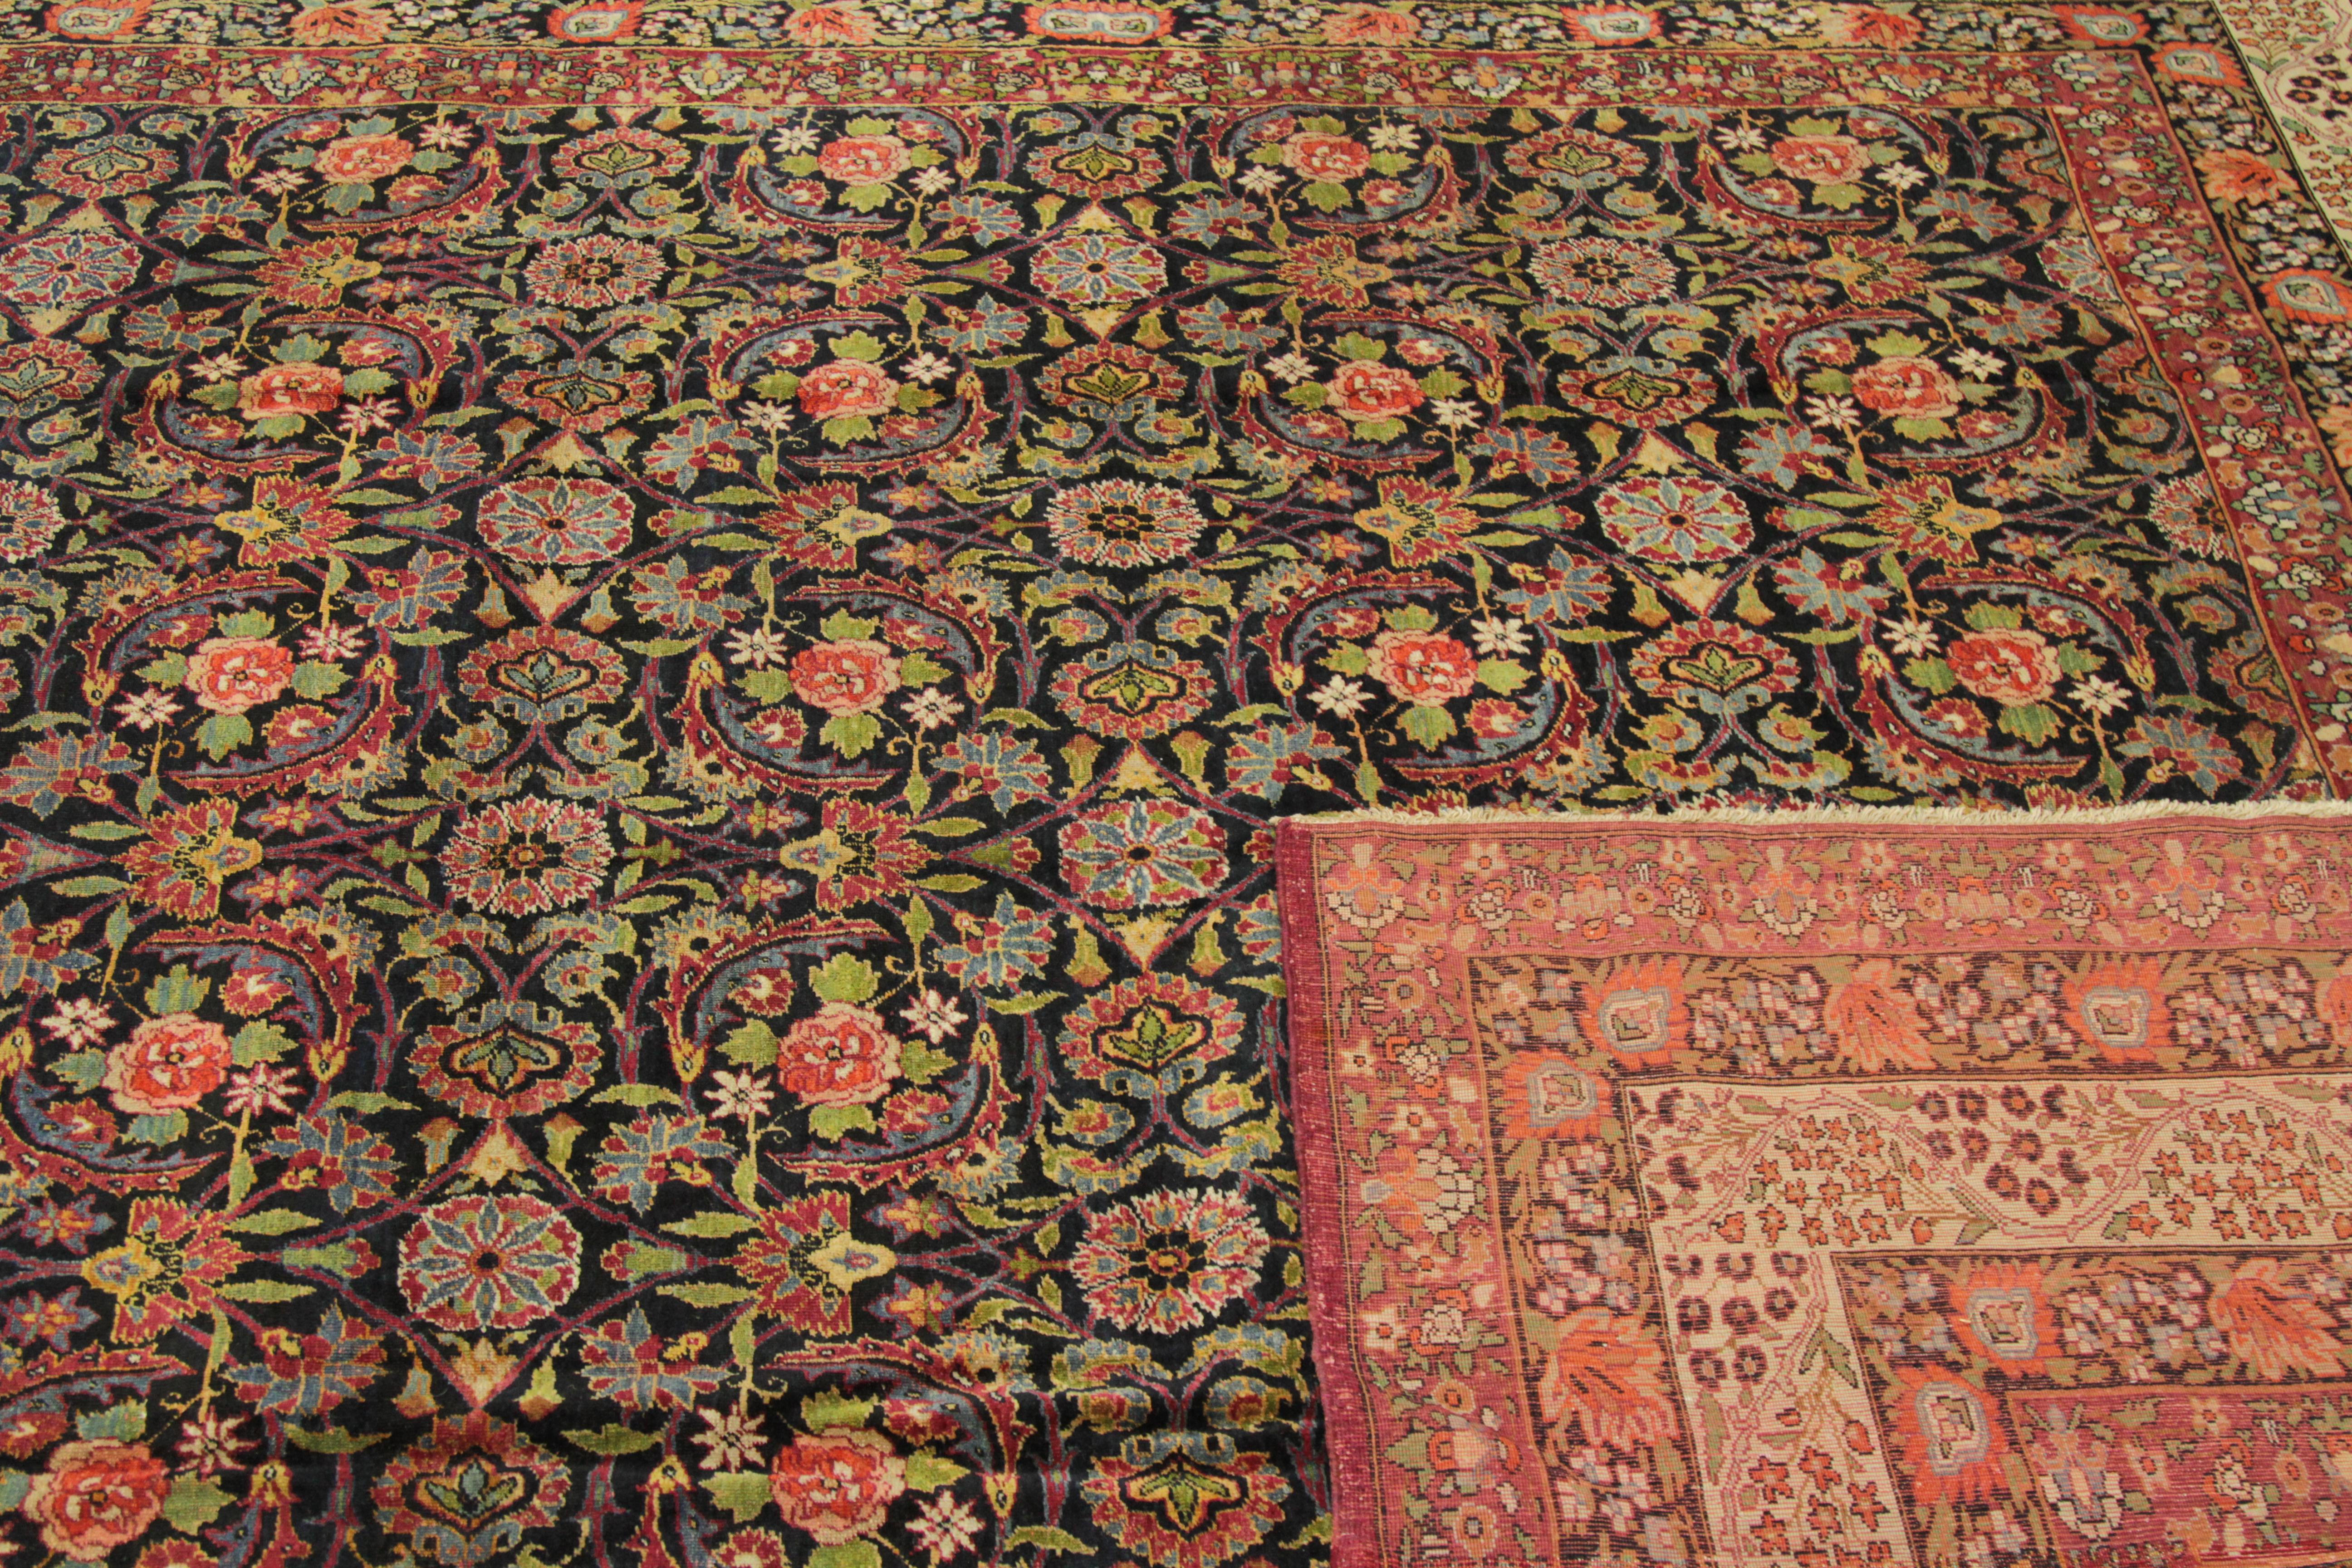 1890s Antique Persian Kerman Rug with Black and Green Flower Field Design In Excellent Condition For Sale In Dallas, TX